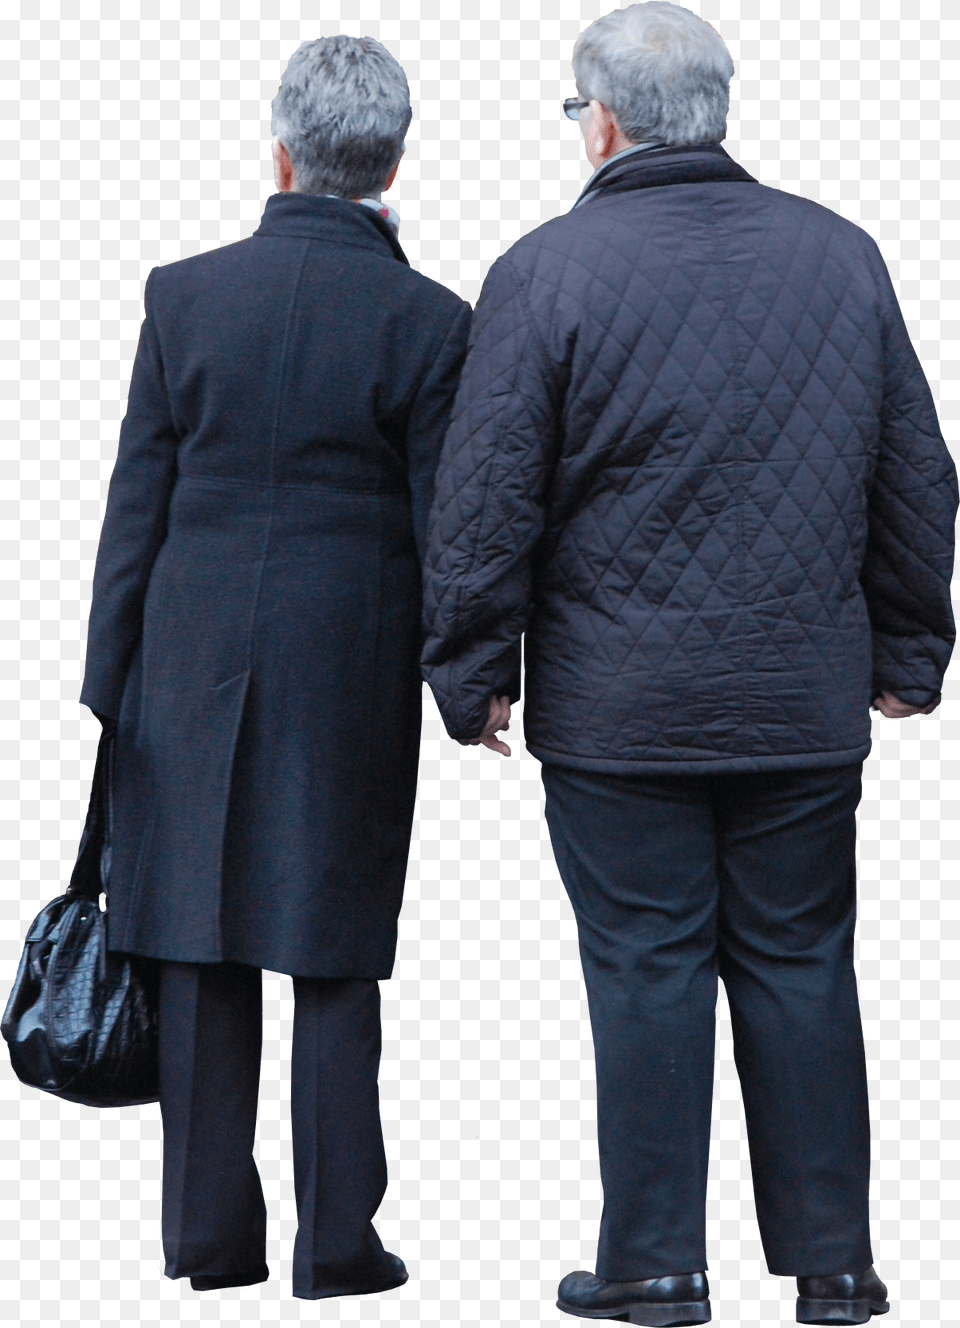 Download Ancianos Photoshop, Jacket, Clothing, Coat, Overcoat Png Image